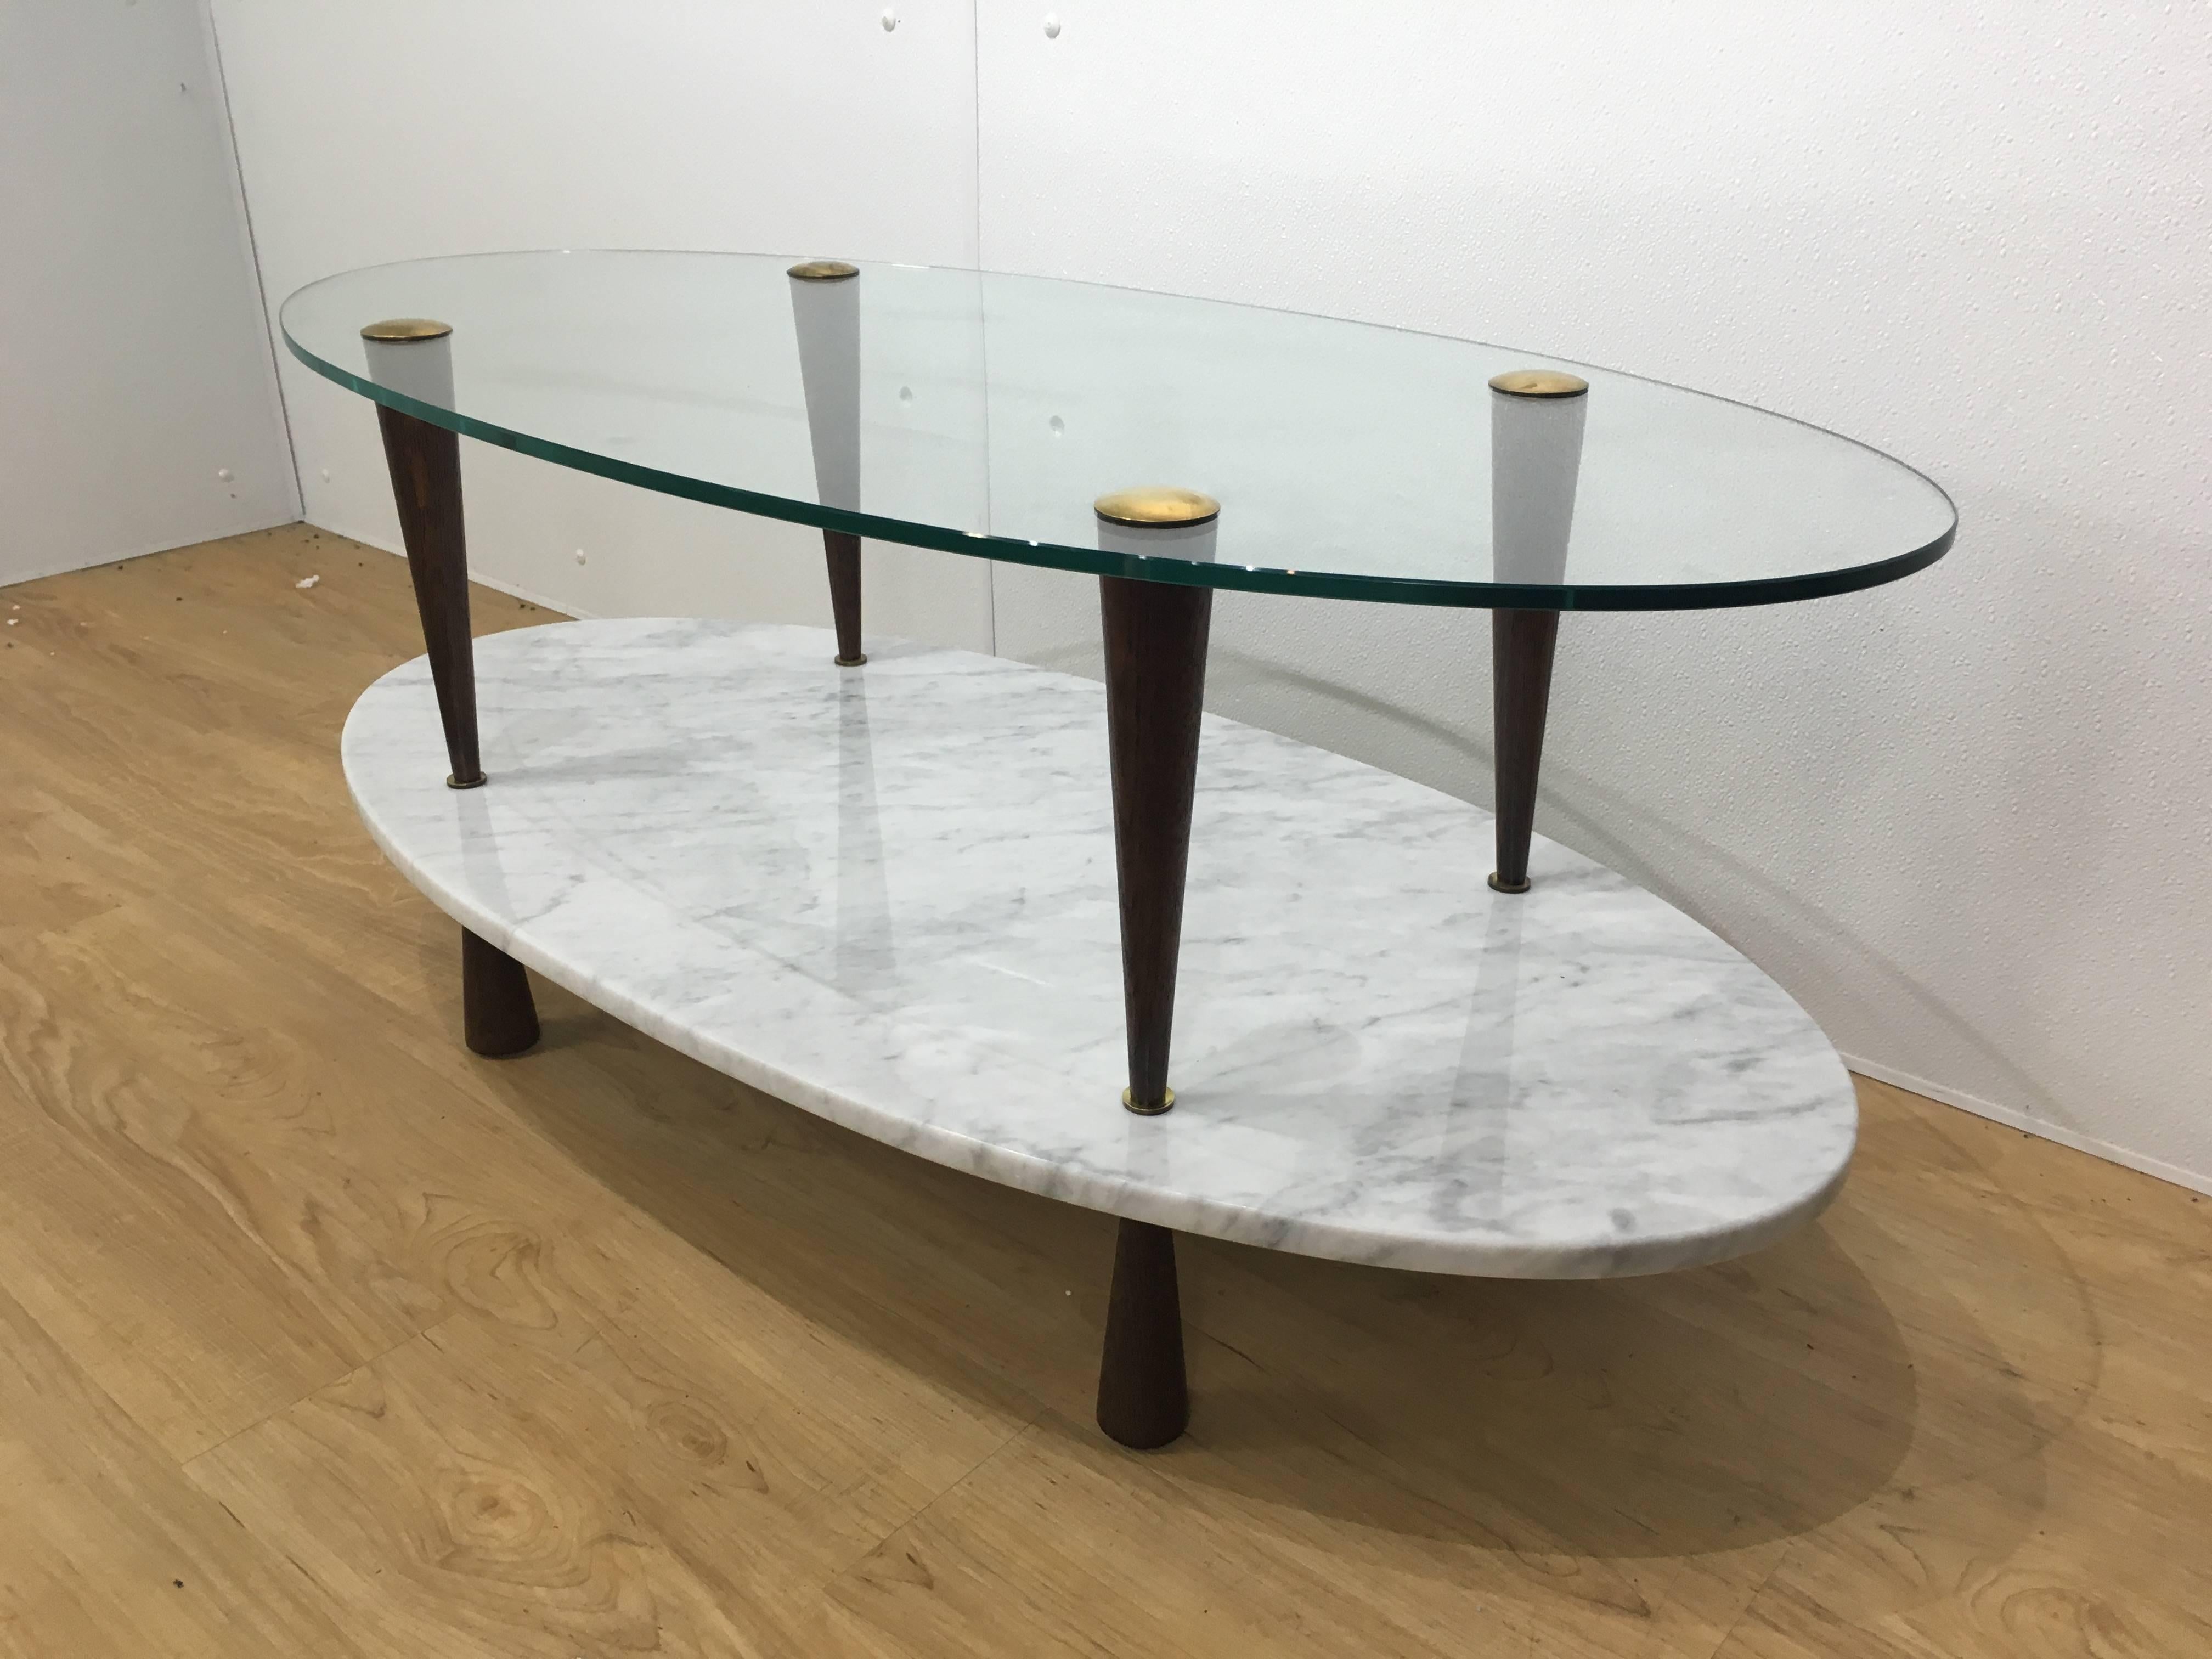 Italian two-tier marble and glass cocktail table in the manner of Gio Ponti with oval glass top and brass capped conoid legs, lower Carrara marble shelf. Expertly finished.
We have the matching pair of side table in stock (inv. # 1951). Please